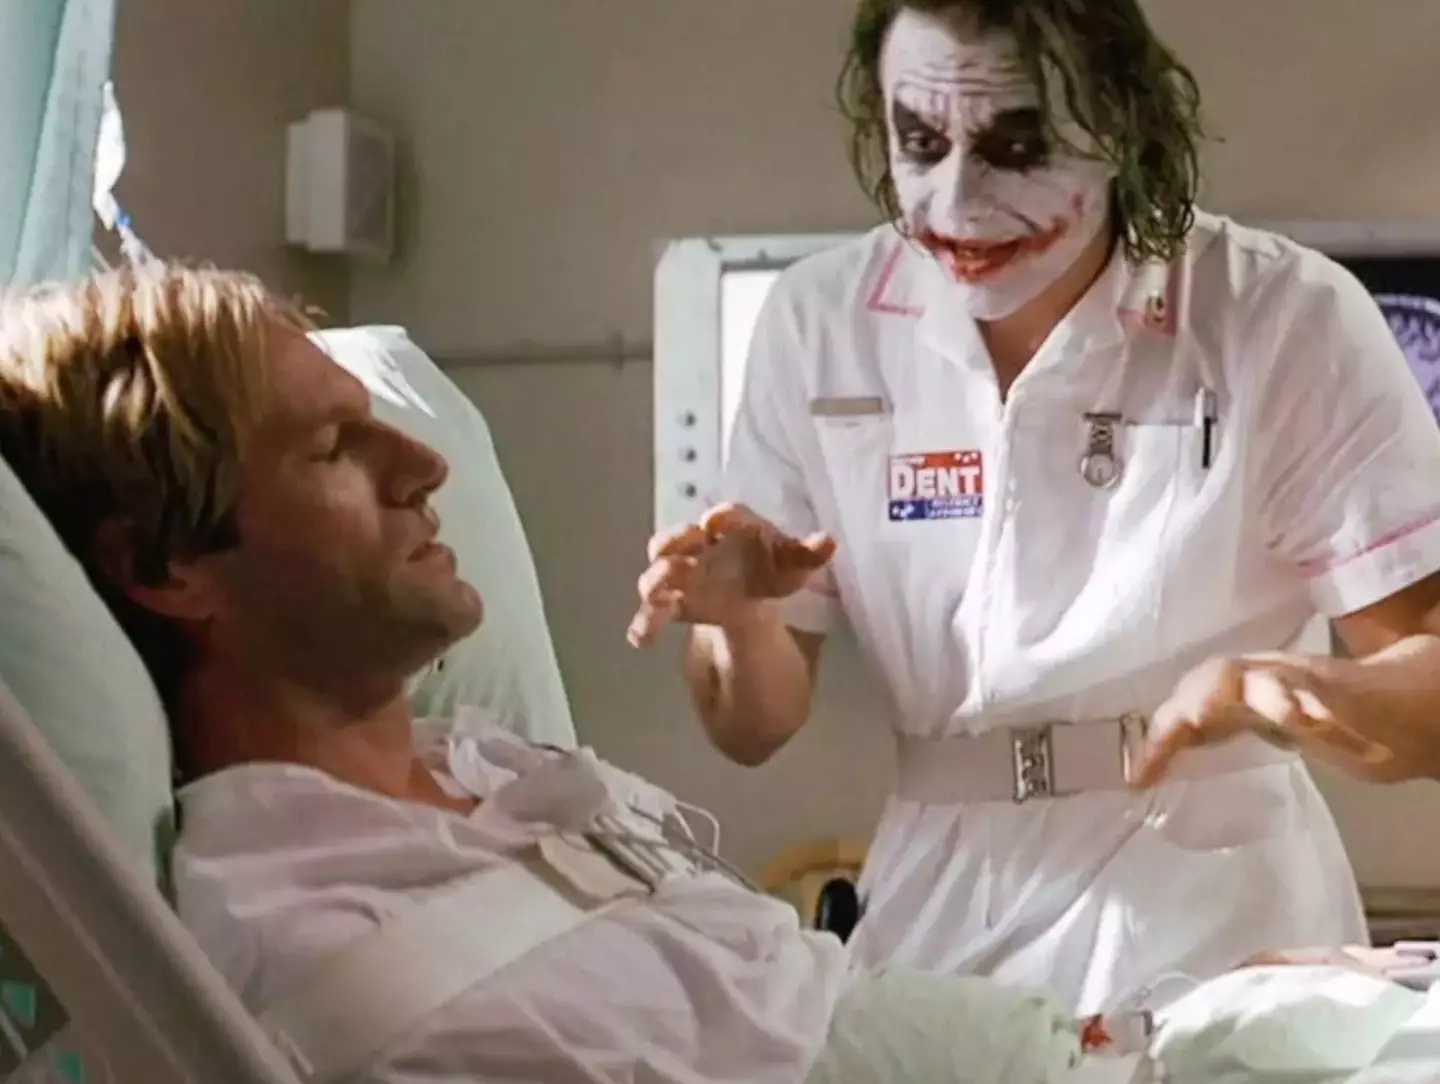 Ledger's performance as The Joker will go down in history as one of the best villainous performances ever.